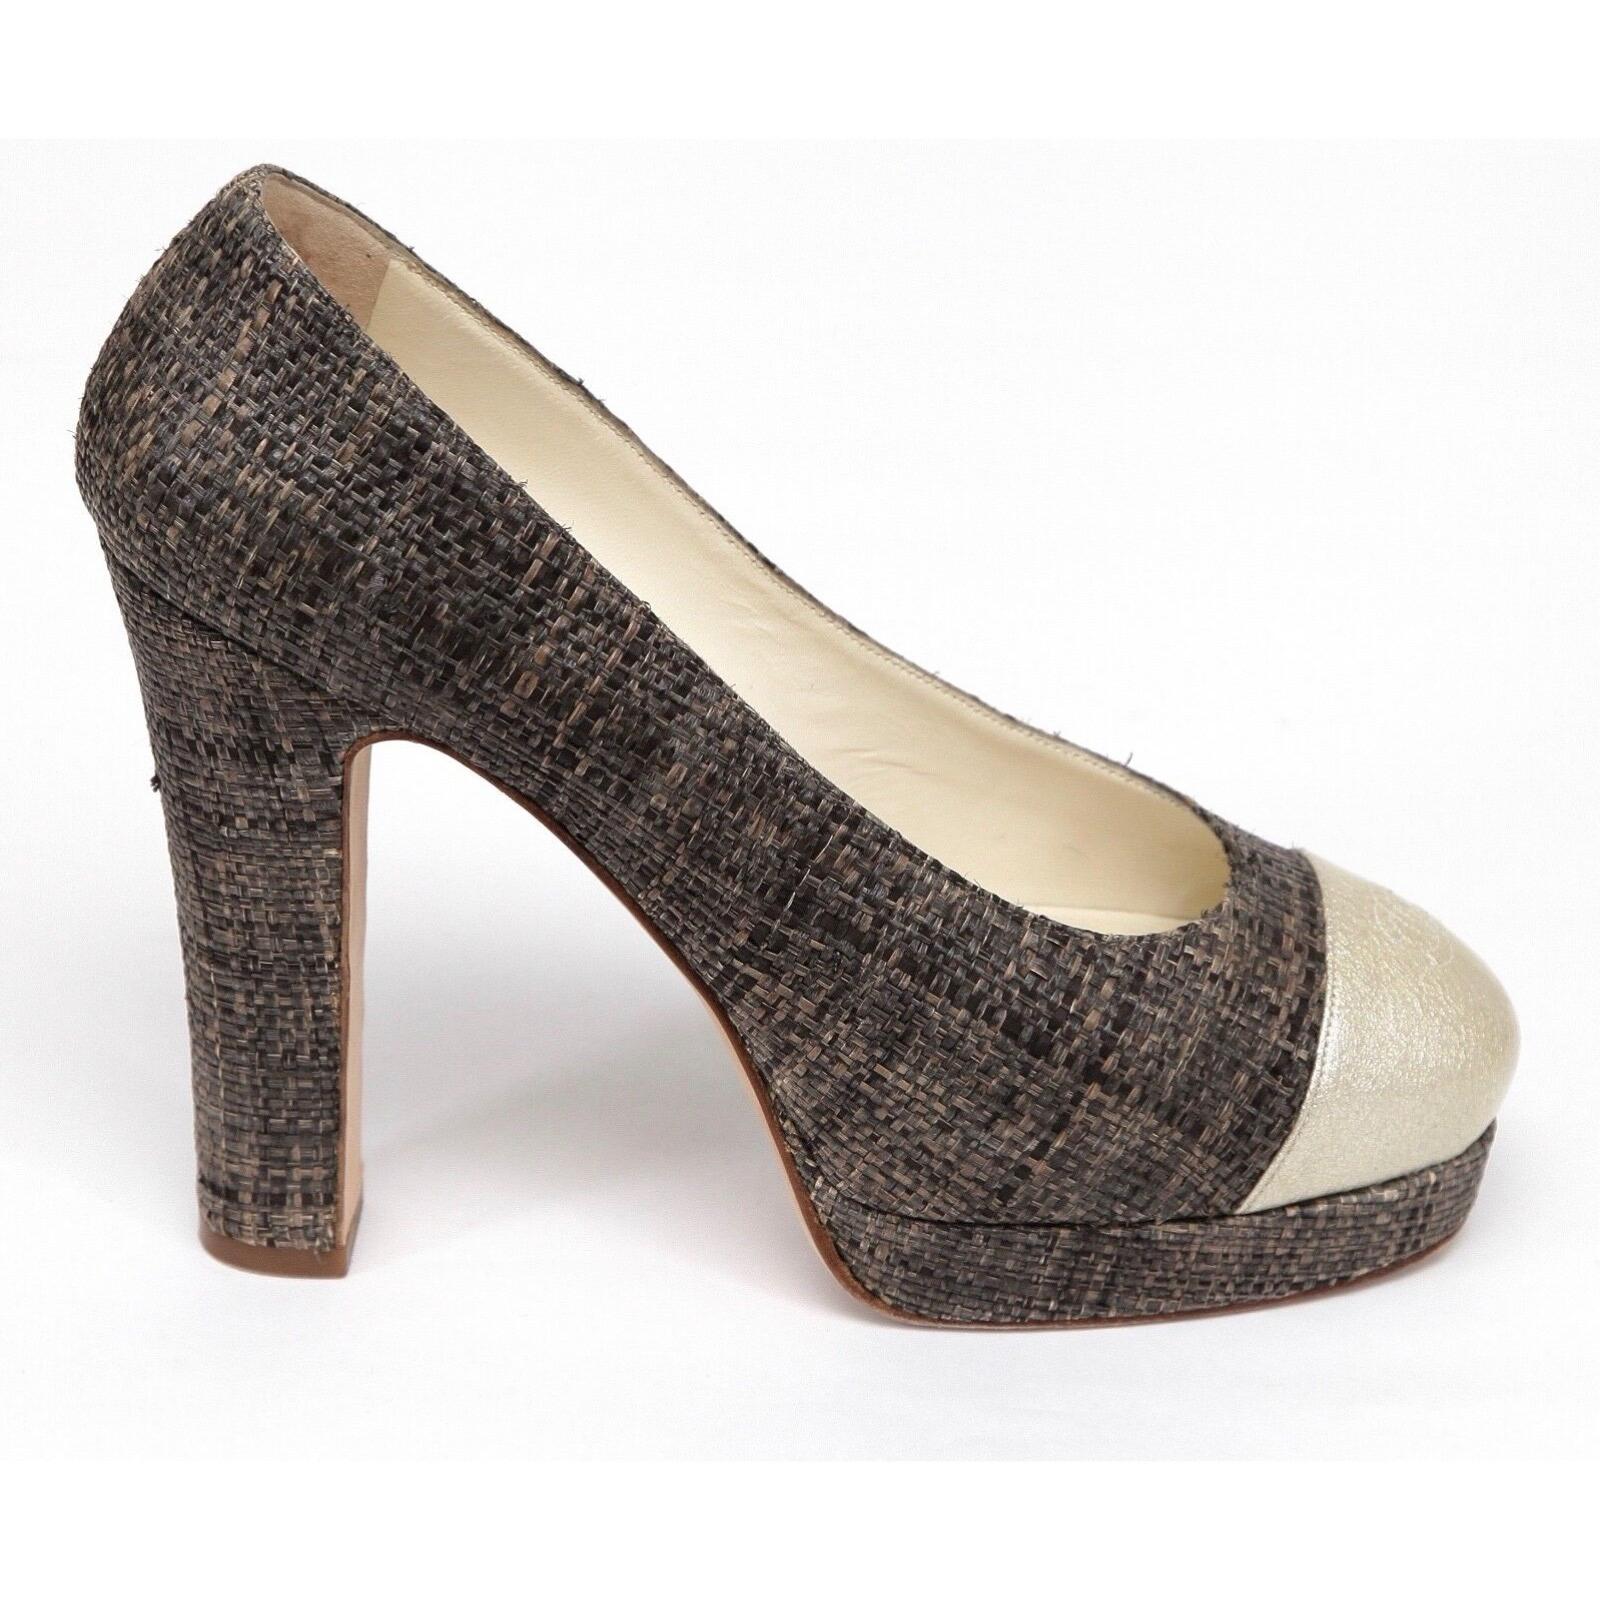 GUARANTEED AUTHENTIC CHANEL STRAW PLATFORM PUMP

 

Design:
- Brown straw tweed platform pump.
- Round metallic gold patent leather cap toe with stitched CC logo.
- Self-covered heel.
- Leather lining and sole.
- Comes with dust bag.

Size: